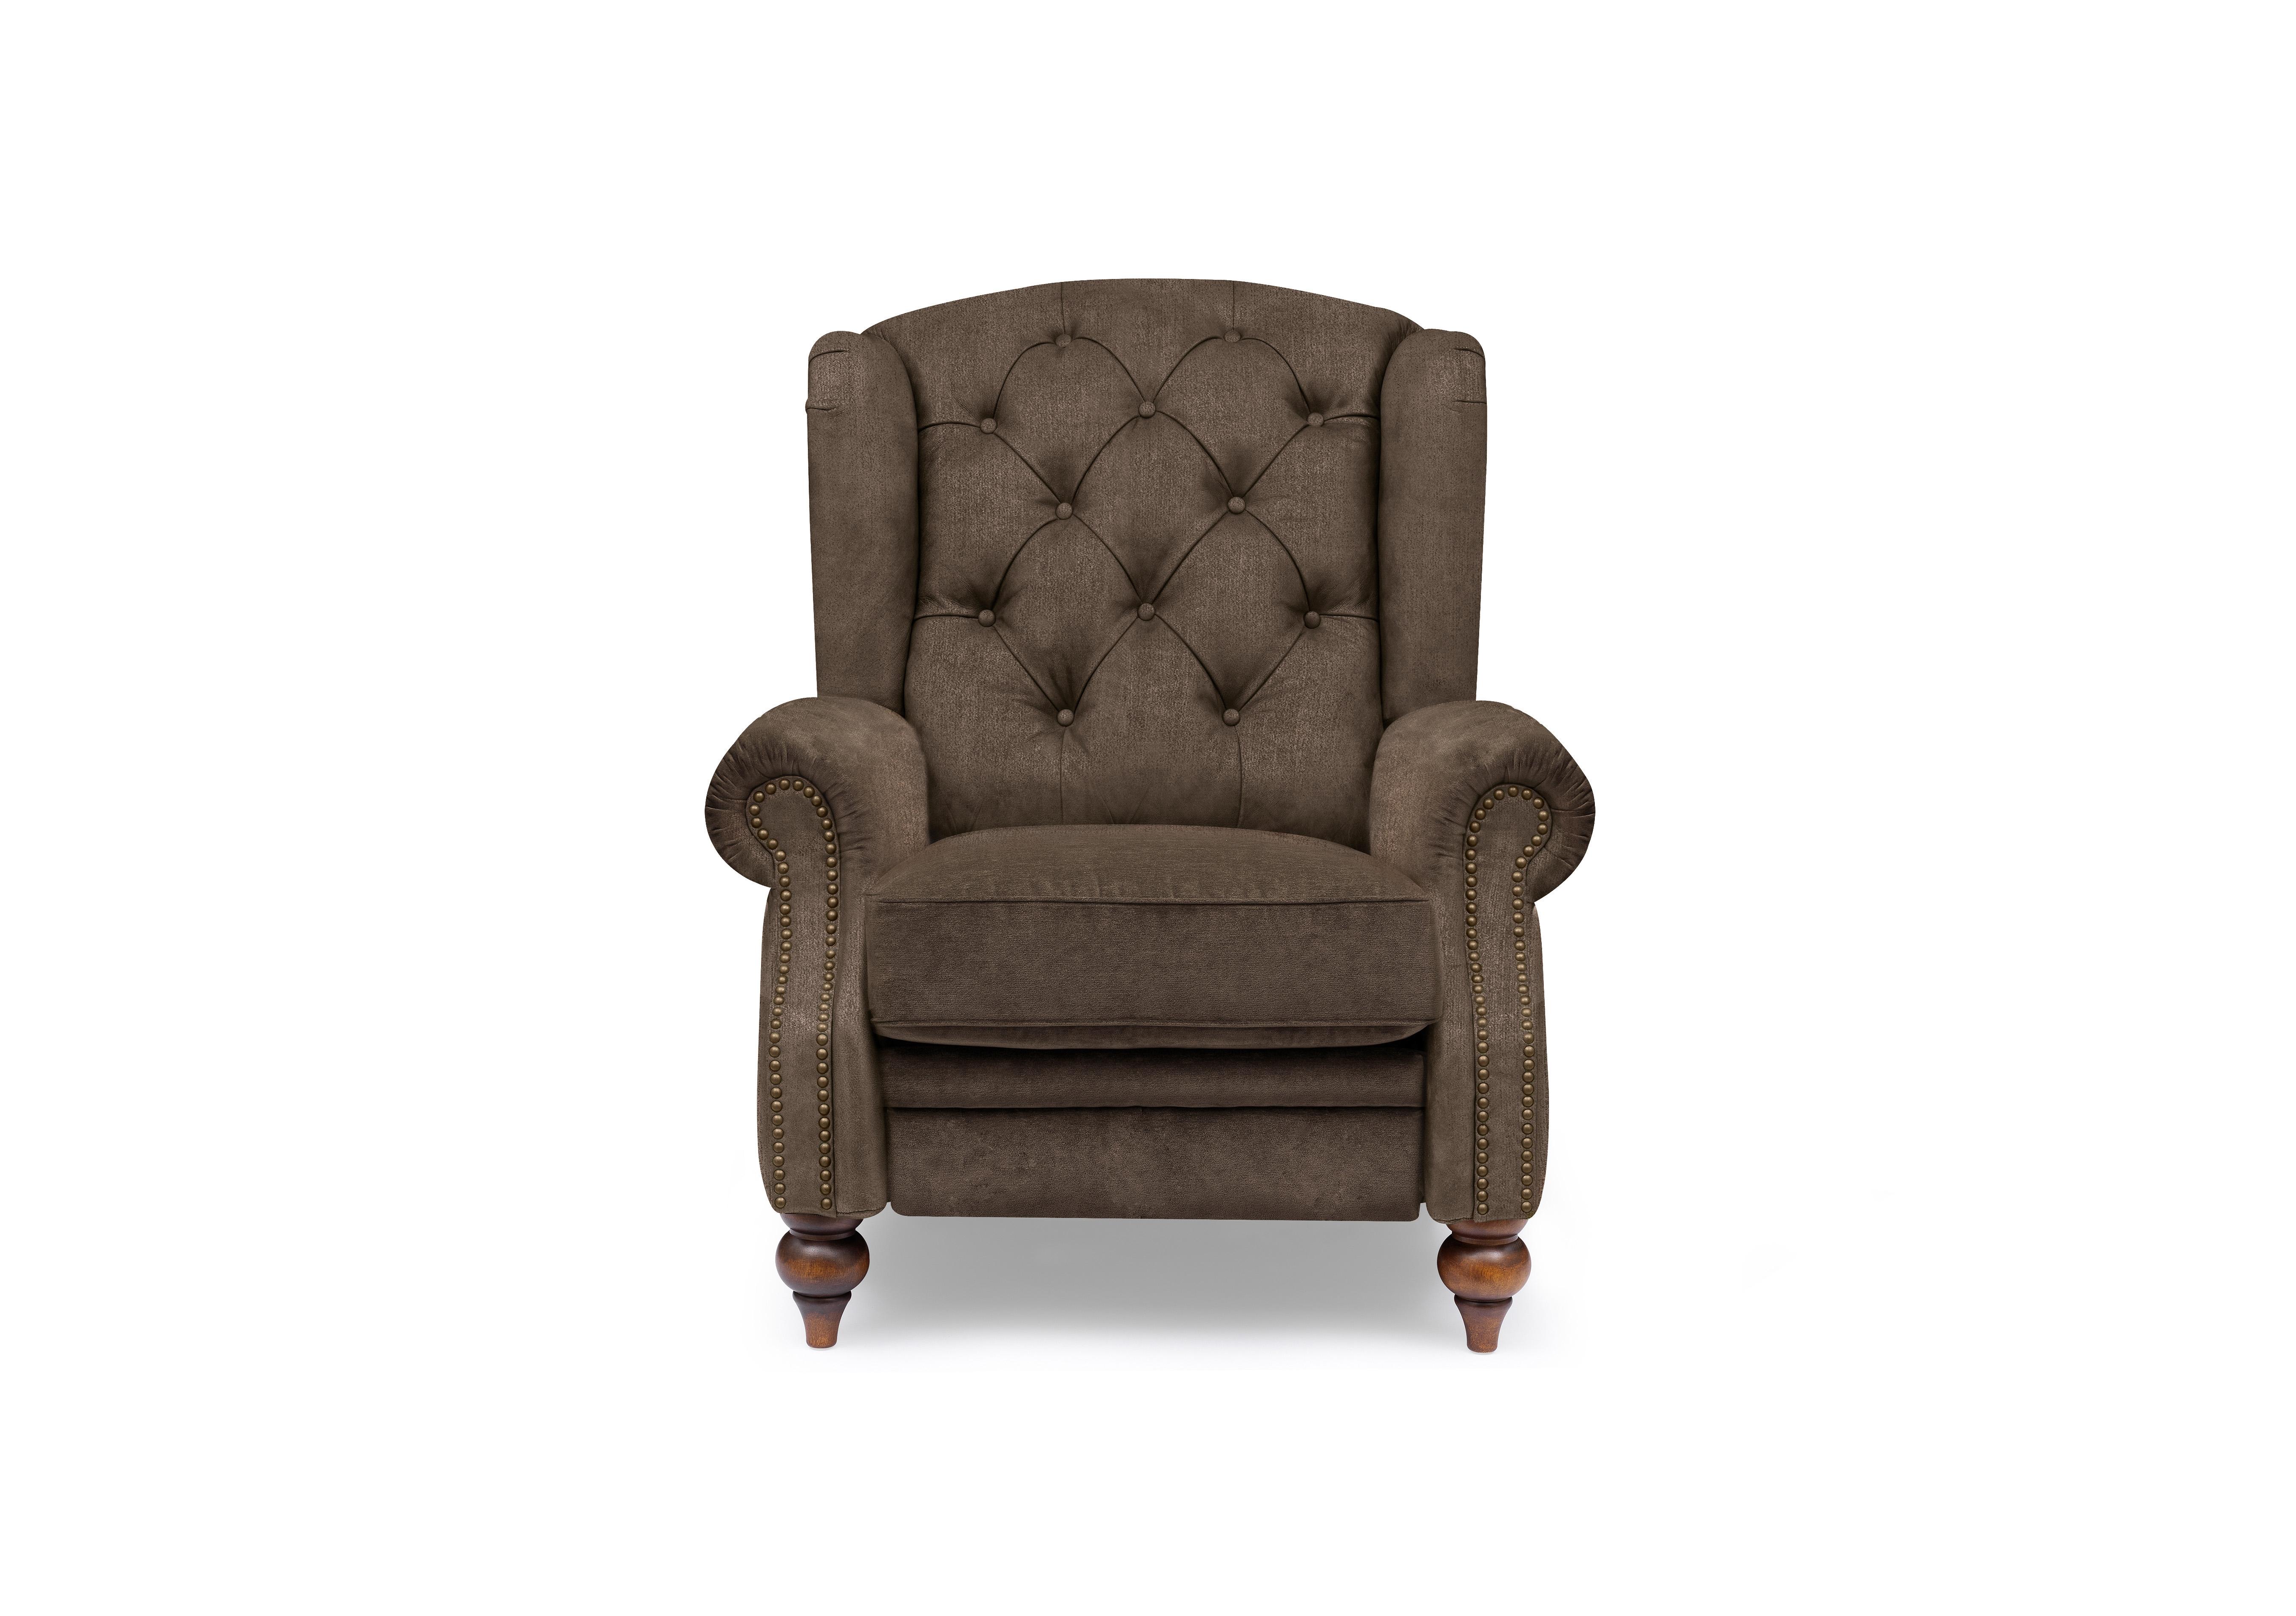 Shackleton Fabric Power Recliner Wing Chair in X3y1-W020 Brindle on Furniture Village